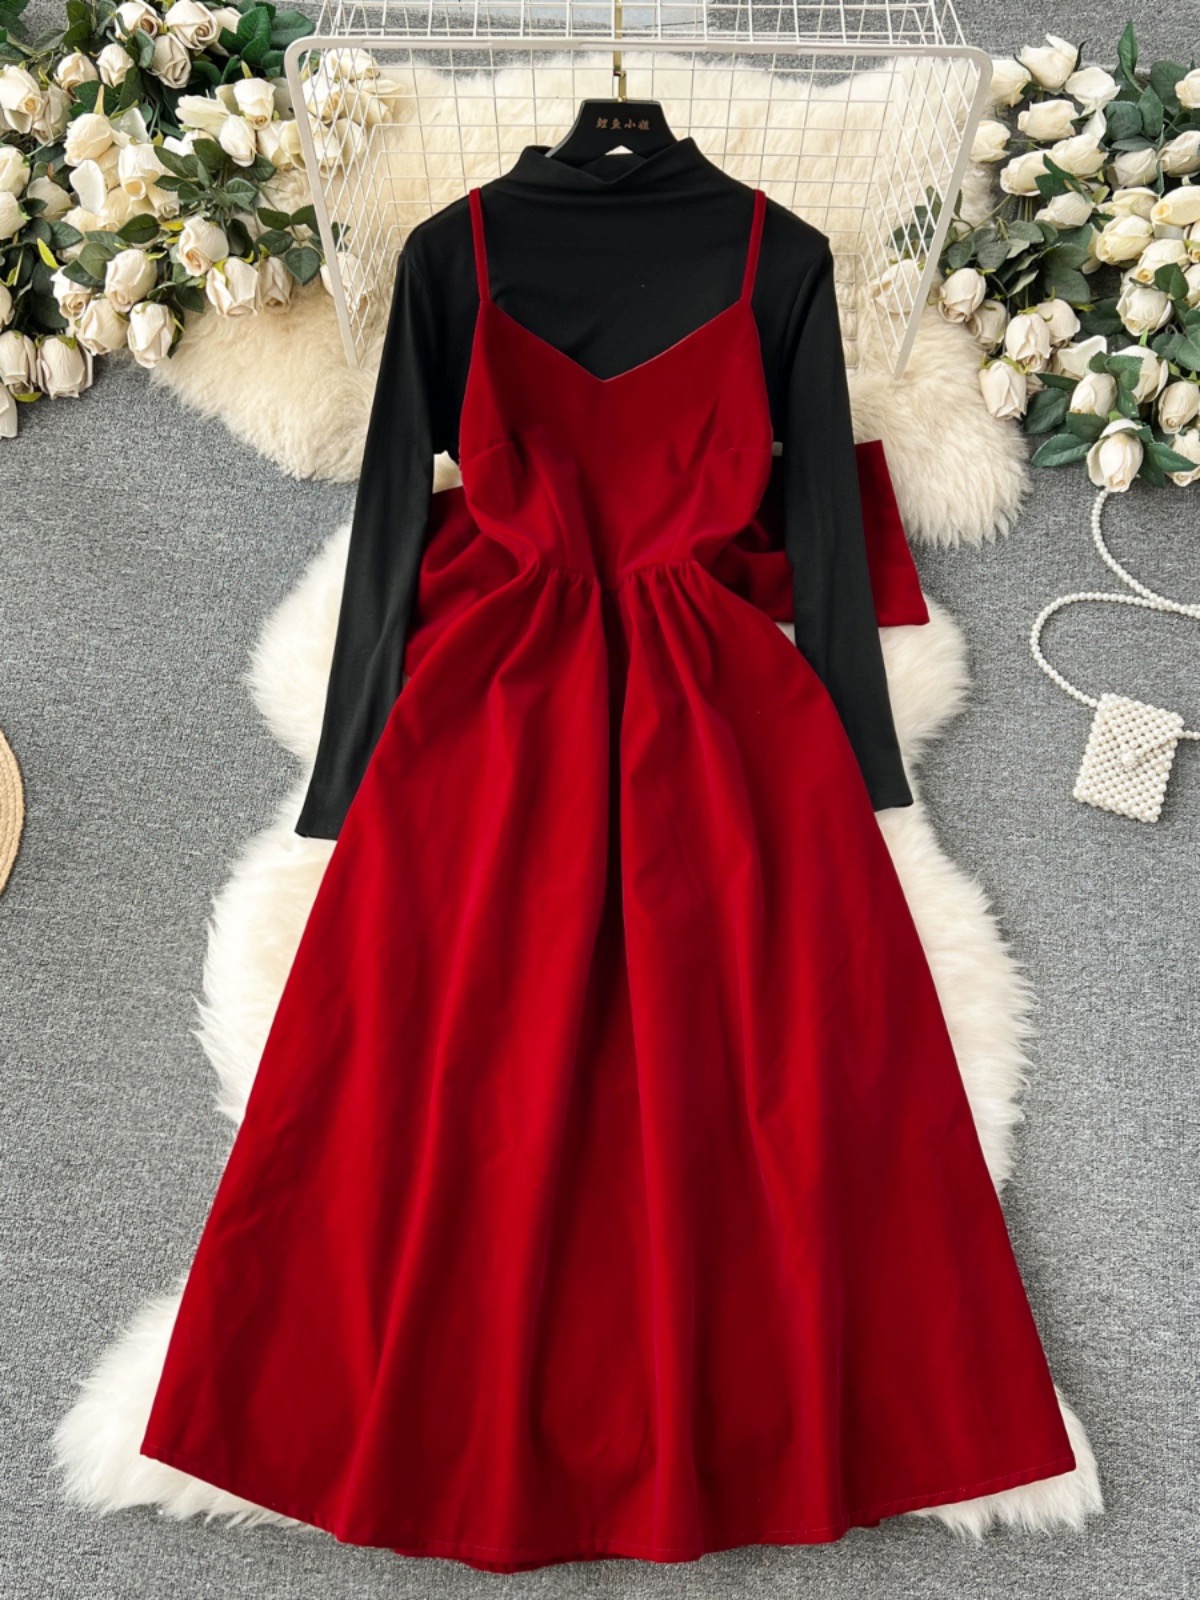 Cute Bow Velvet Backless Dress Fashion Dress,vintage Red Dress,black Top ,two Piece